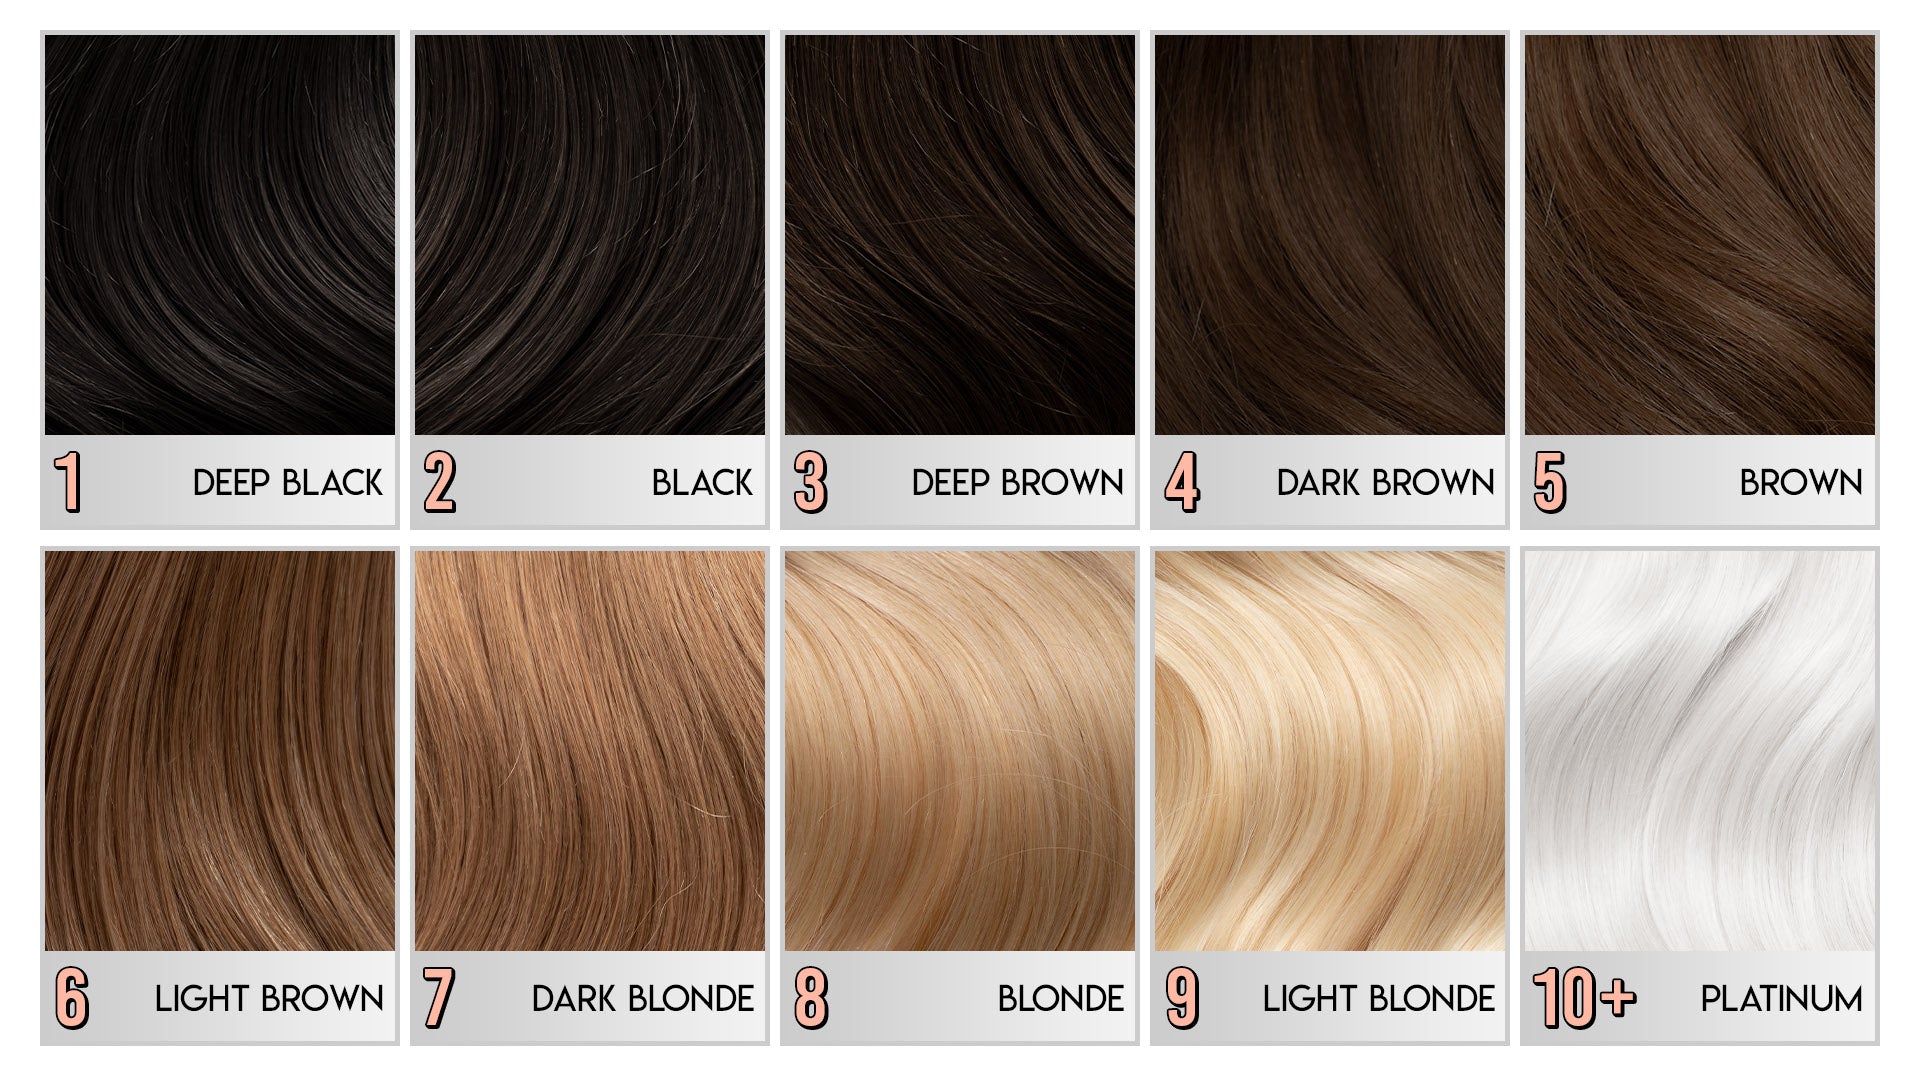 1. How to Achieve a Beautiful Blonde Hair Color at Level 5 - wide 8